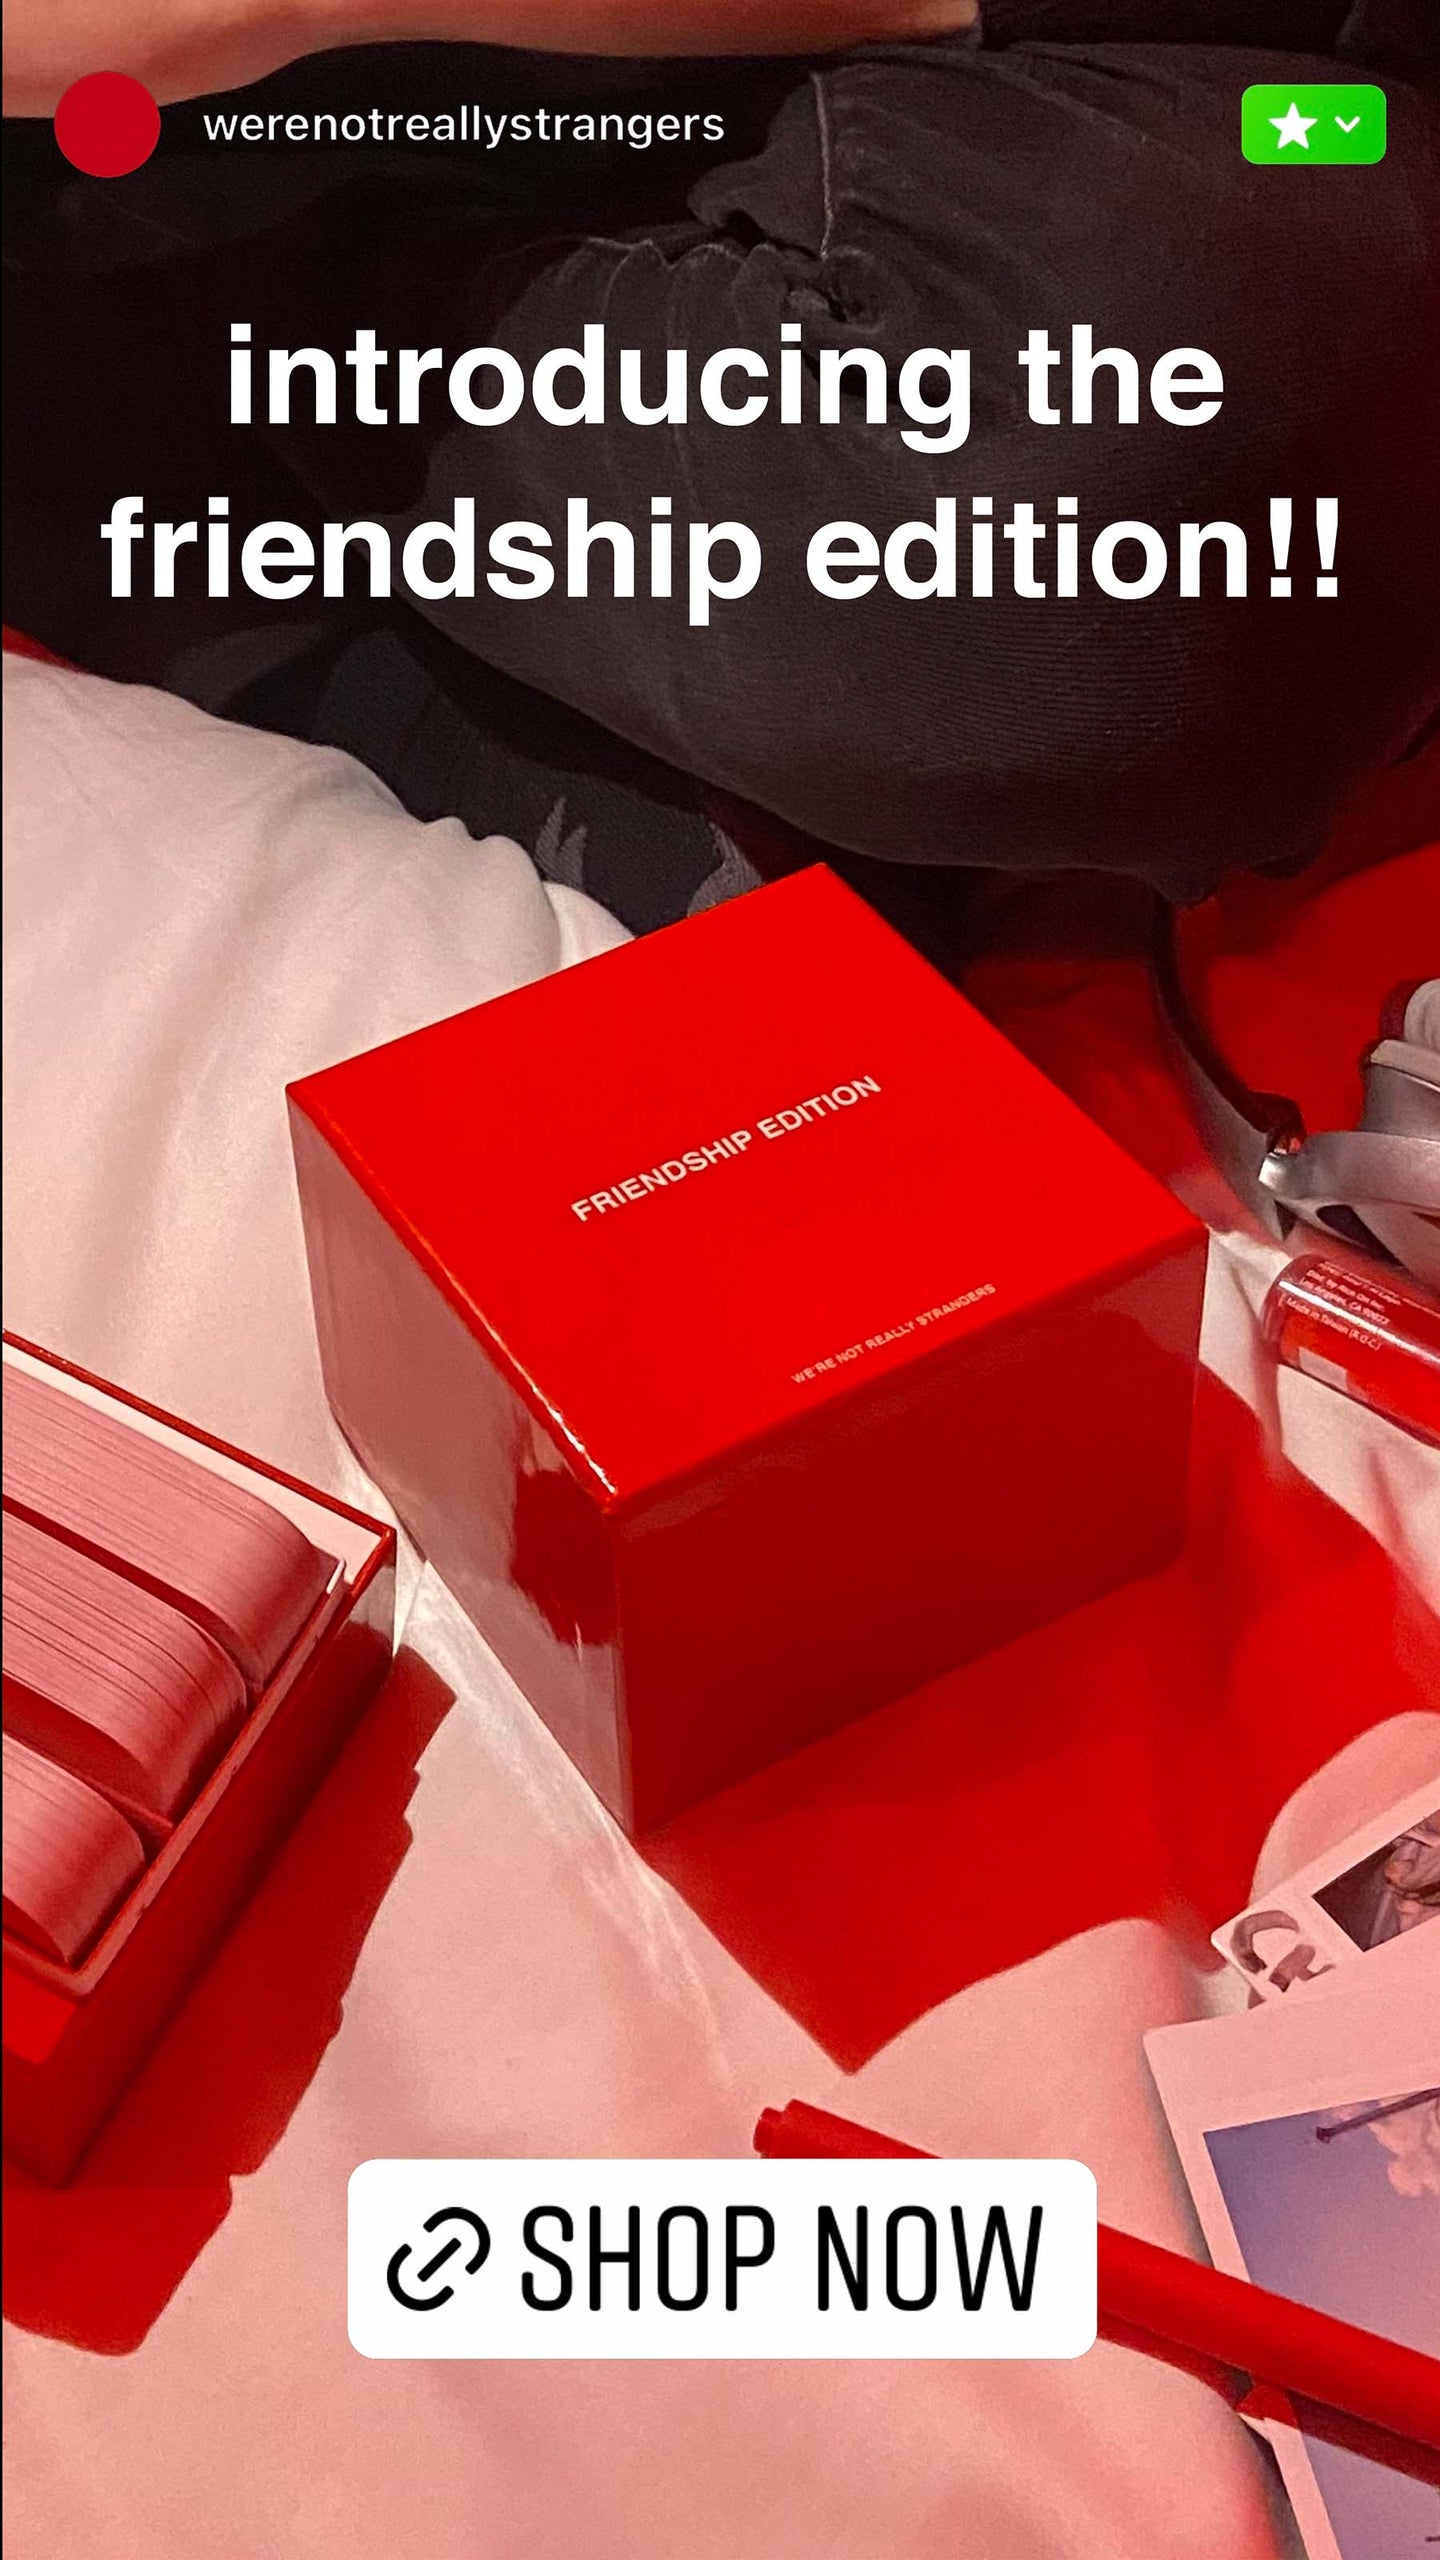 Introducing the Friendship Edition - Shop Now